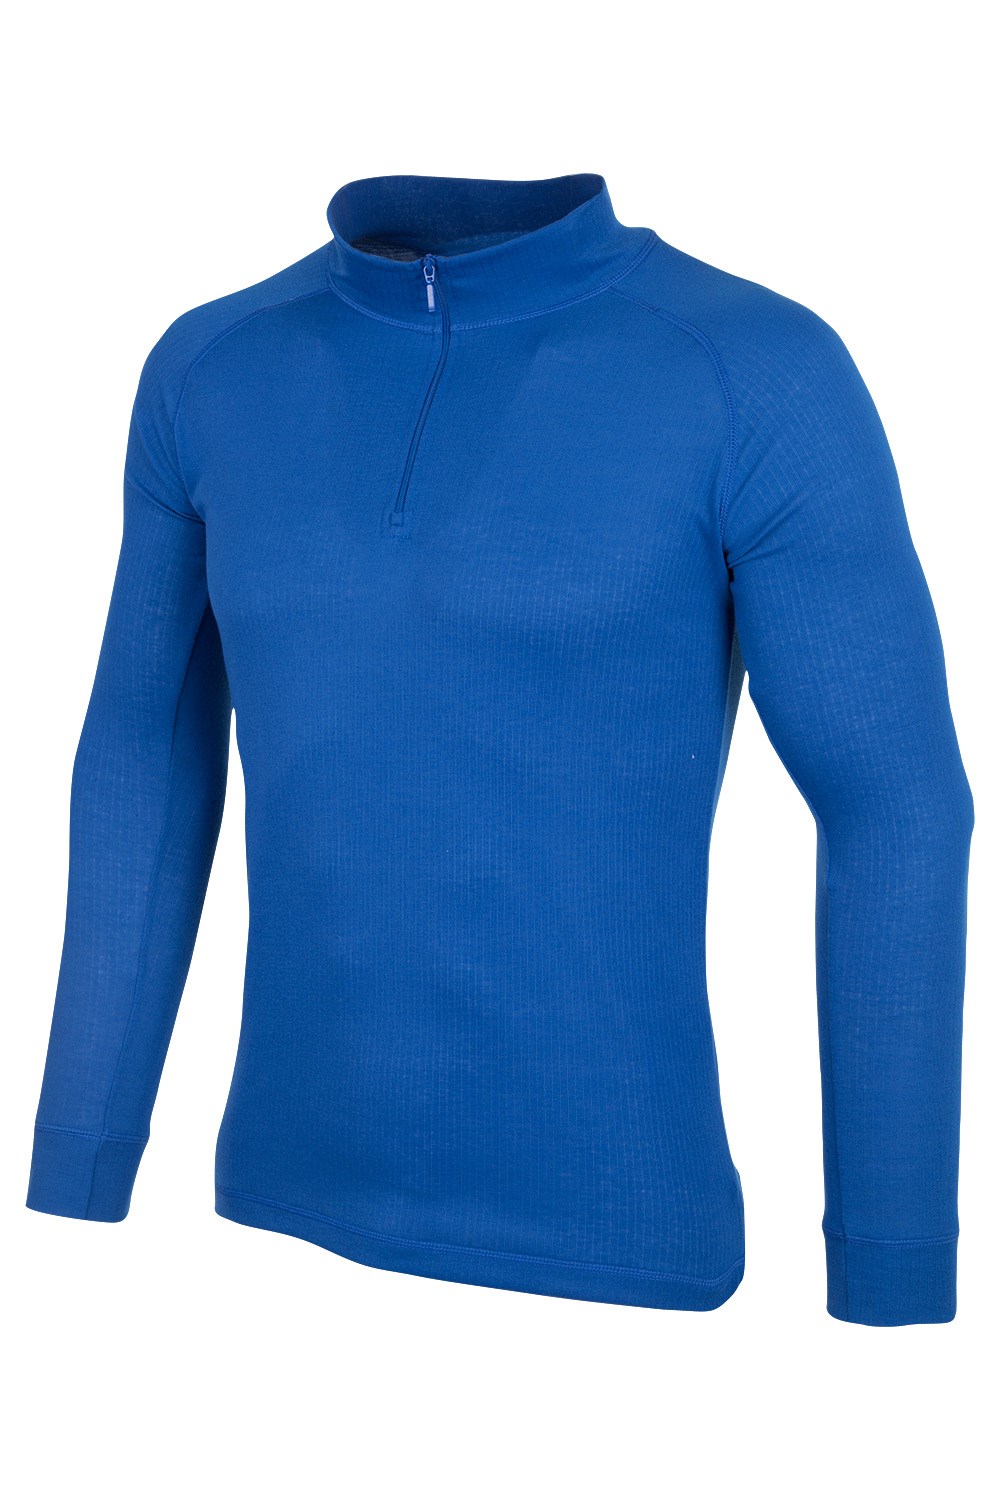 Breathable Long Sleeves Quick Drying Winter Jumper Sweater Easy Care Mountain Warehouse Talus Mens Thermal Baselayer Top Lightweight & High Wicking 